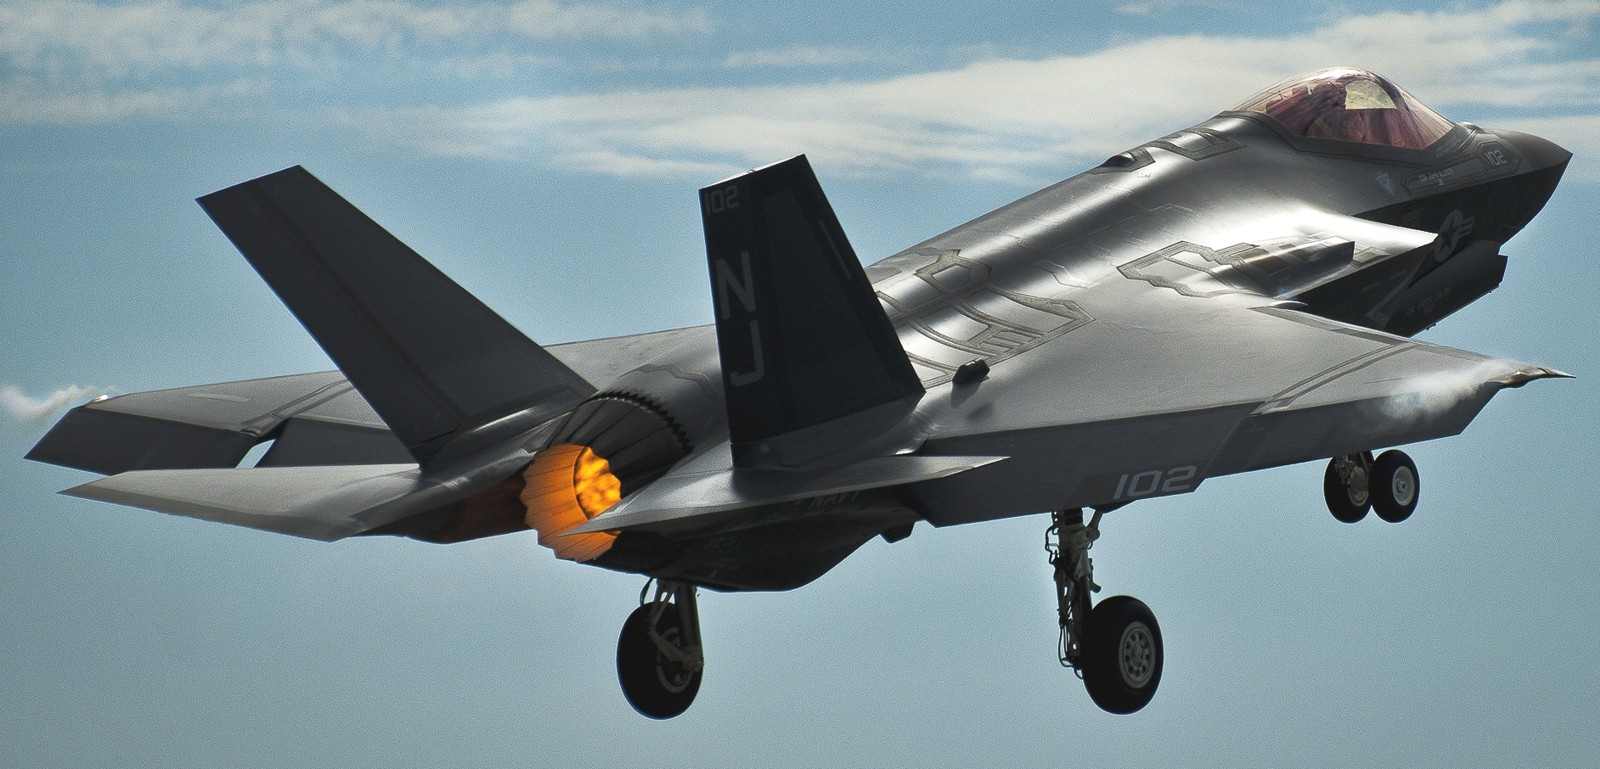 vfa-101 grim reapers strike fighter squadron us navy f-35c lightning jsf frs 03